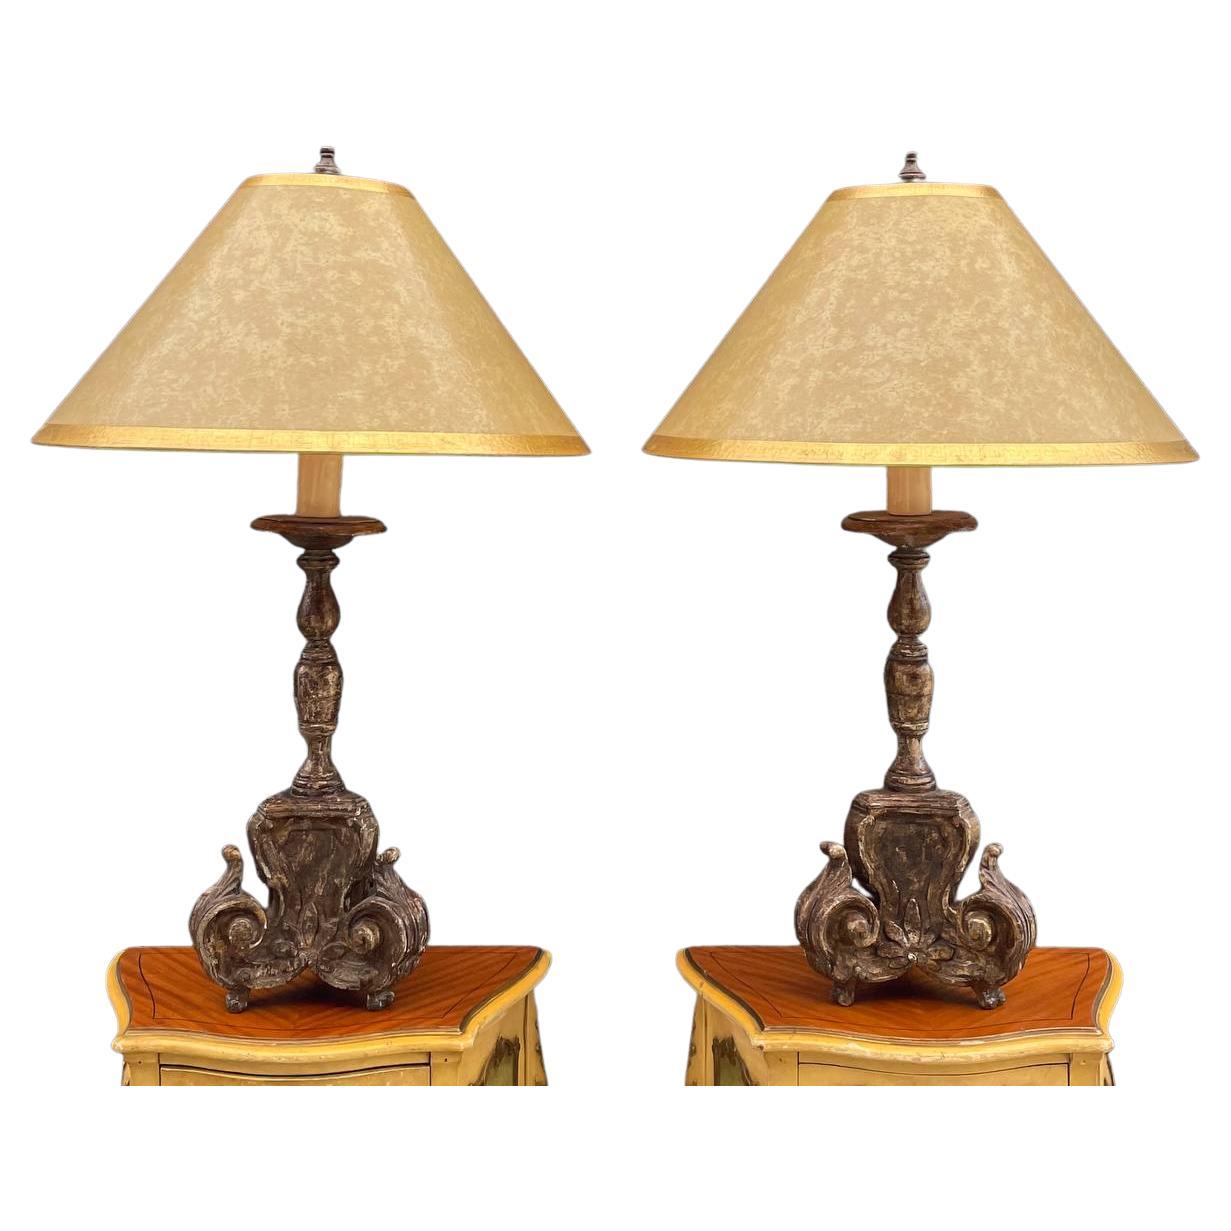 Pair of Italian Antique Candlestick Style Table Lamps with a Distressed Paint F